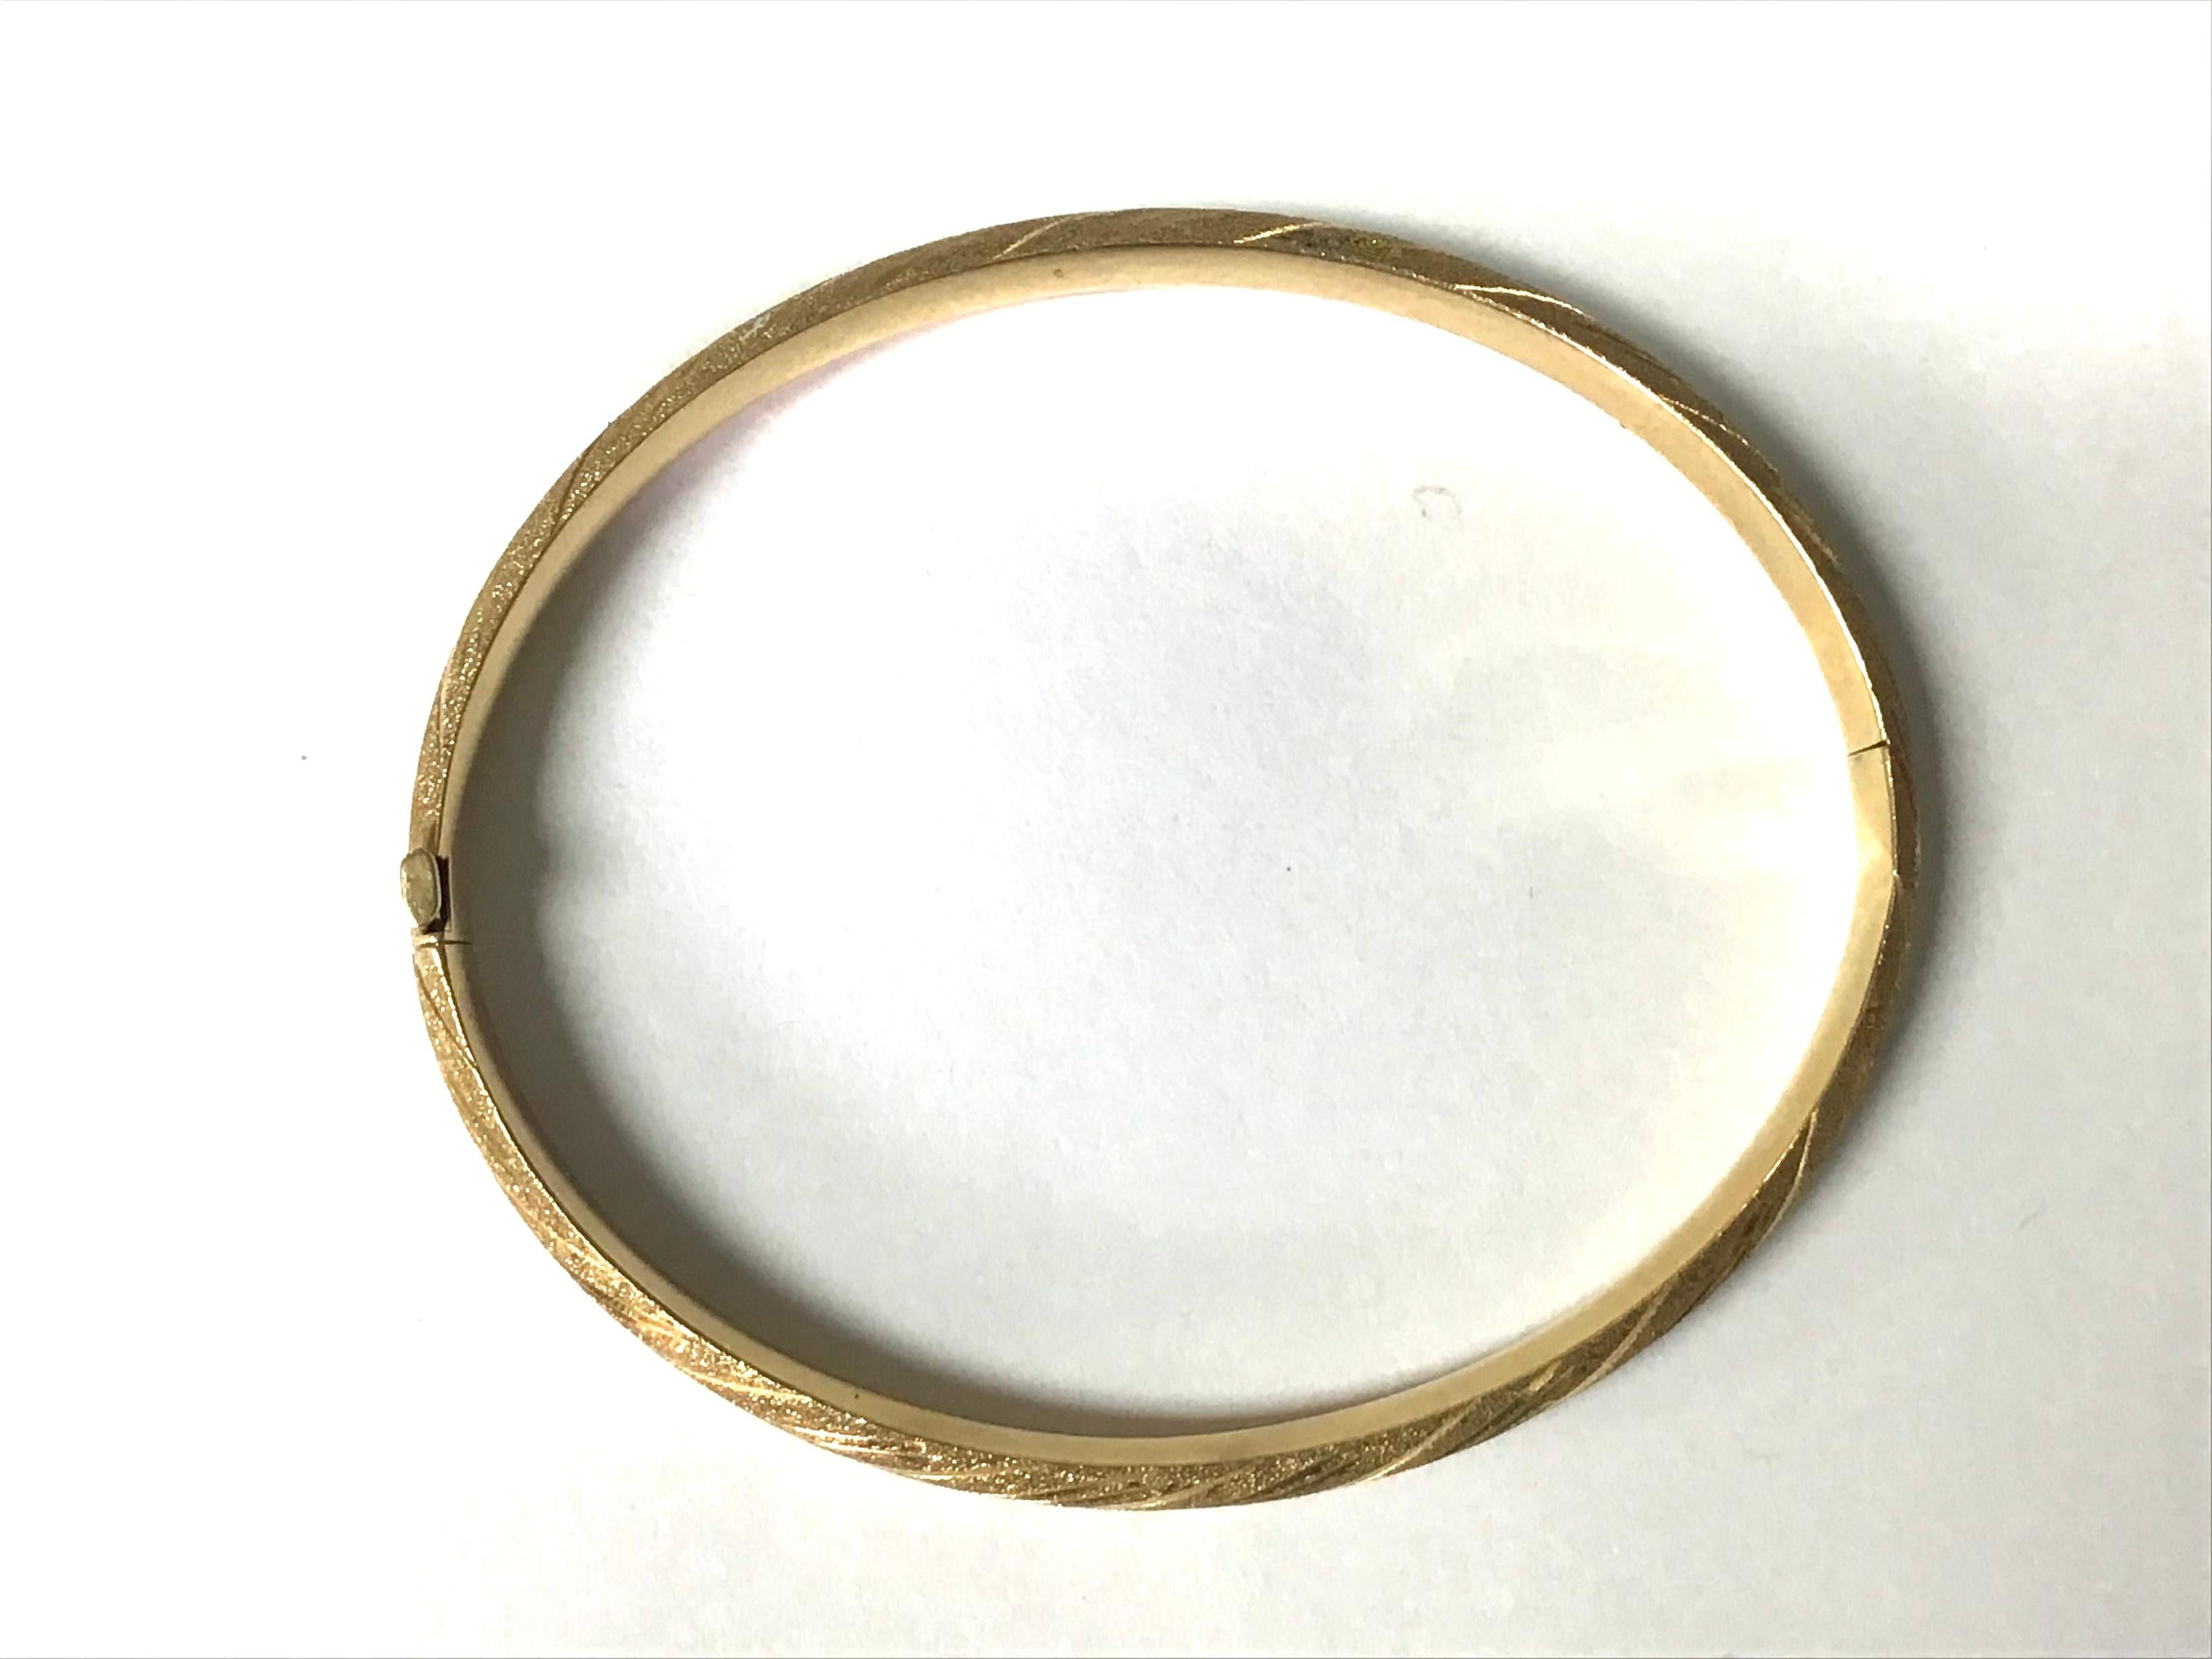 This timeless bangle bracelet is made of 14 karat yellow gold. It has a wonderful warm glow and a weight of 6.9 grams. The bracelet has a nice height of 7 millimeters, is oval shaped and hinged. The bracelet is marked at its closure 14K. This lovely